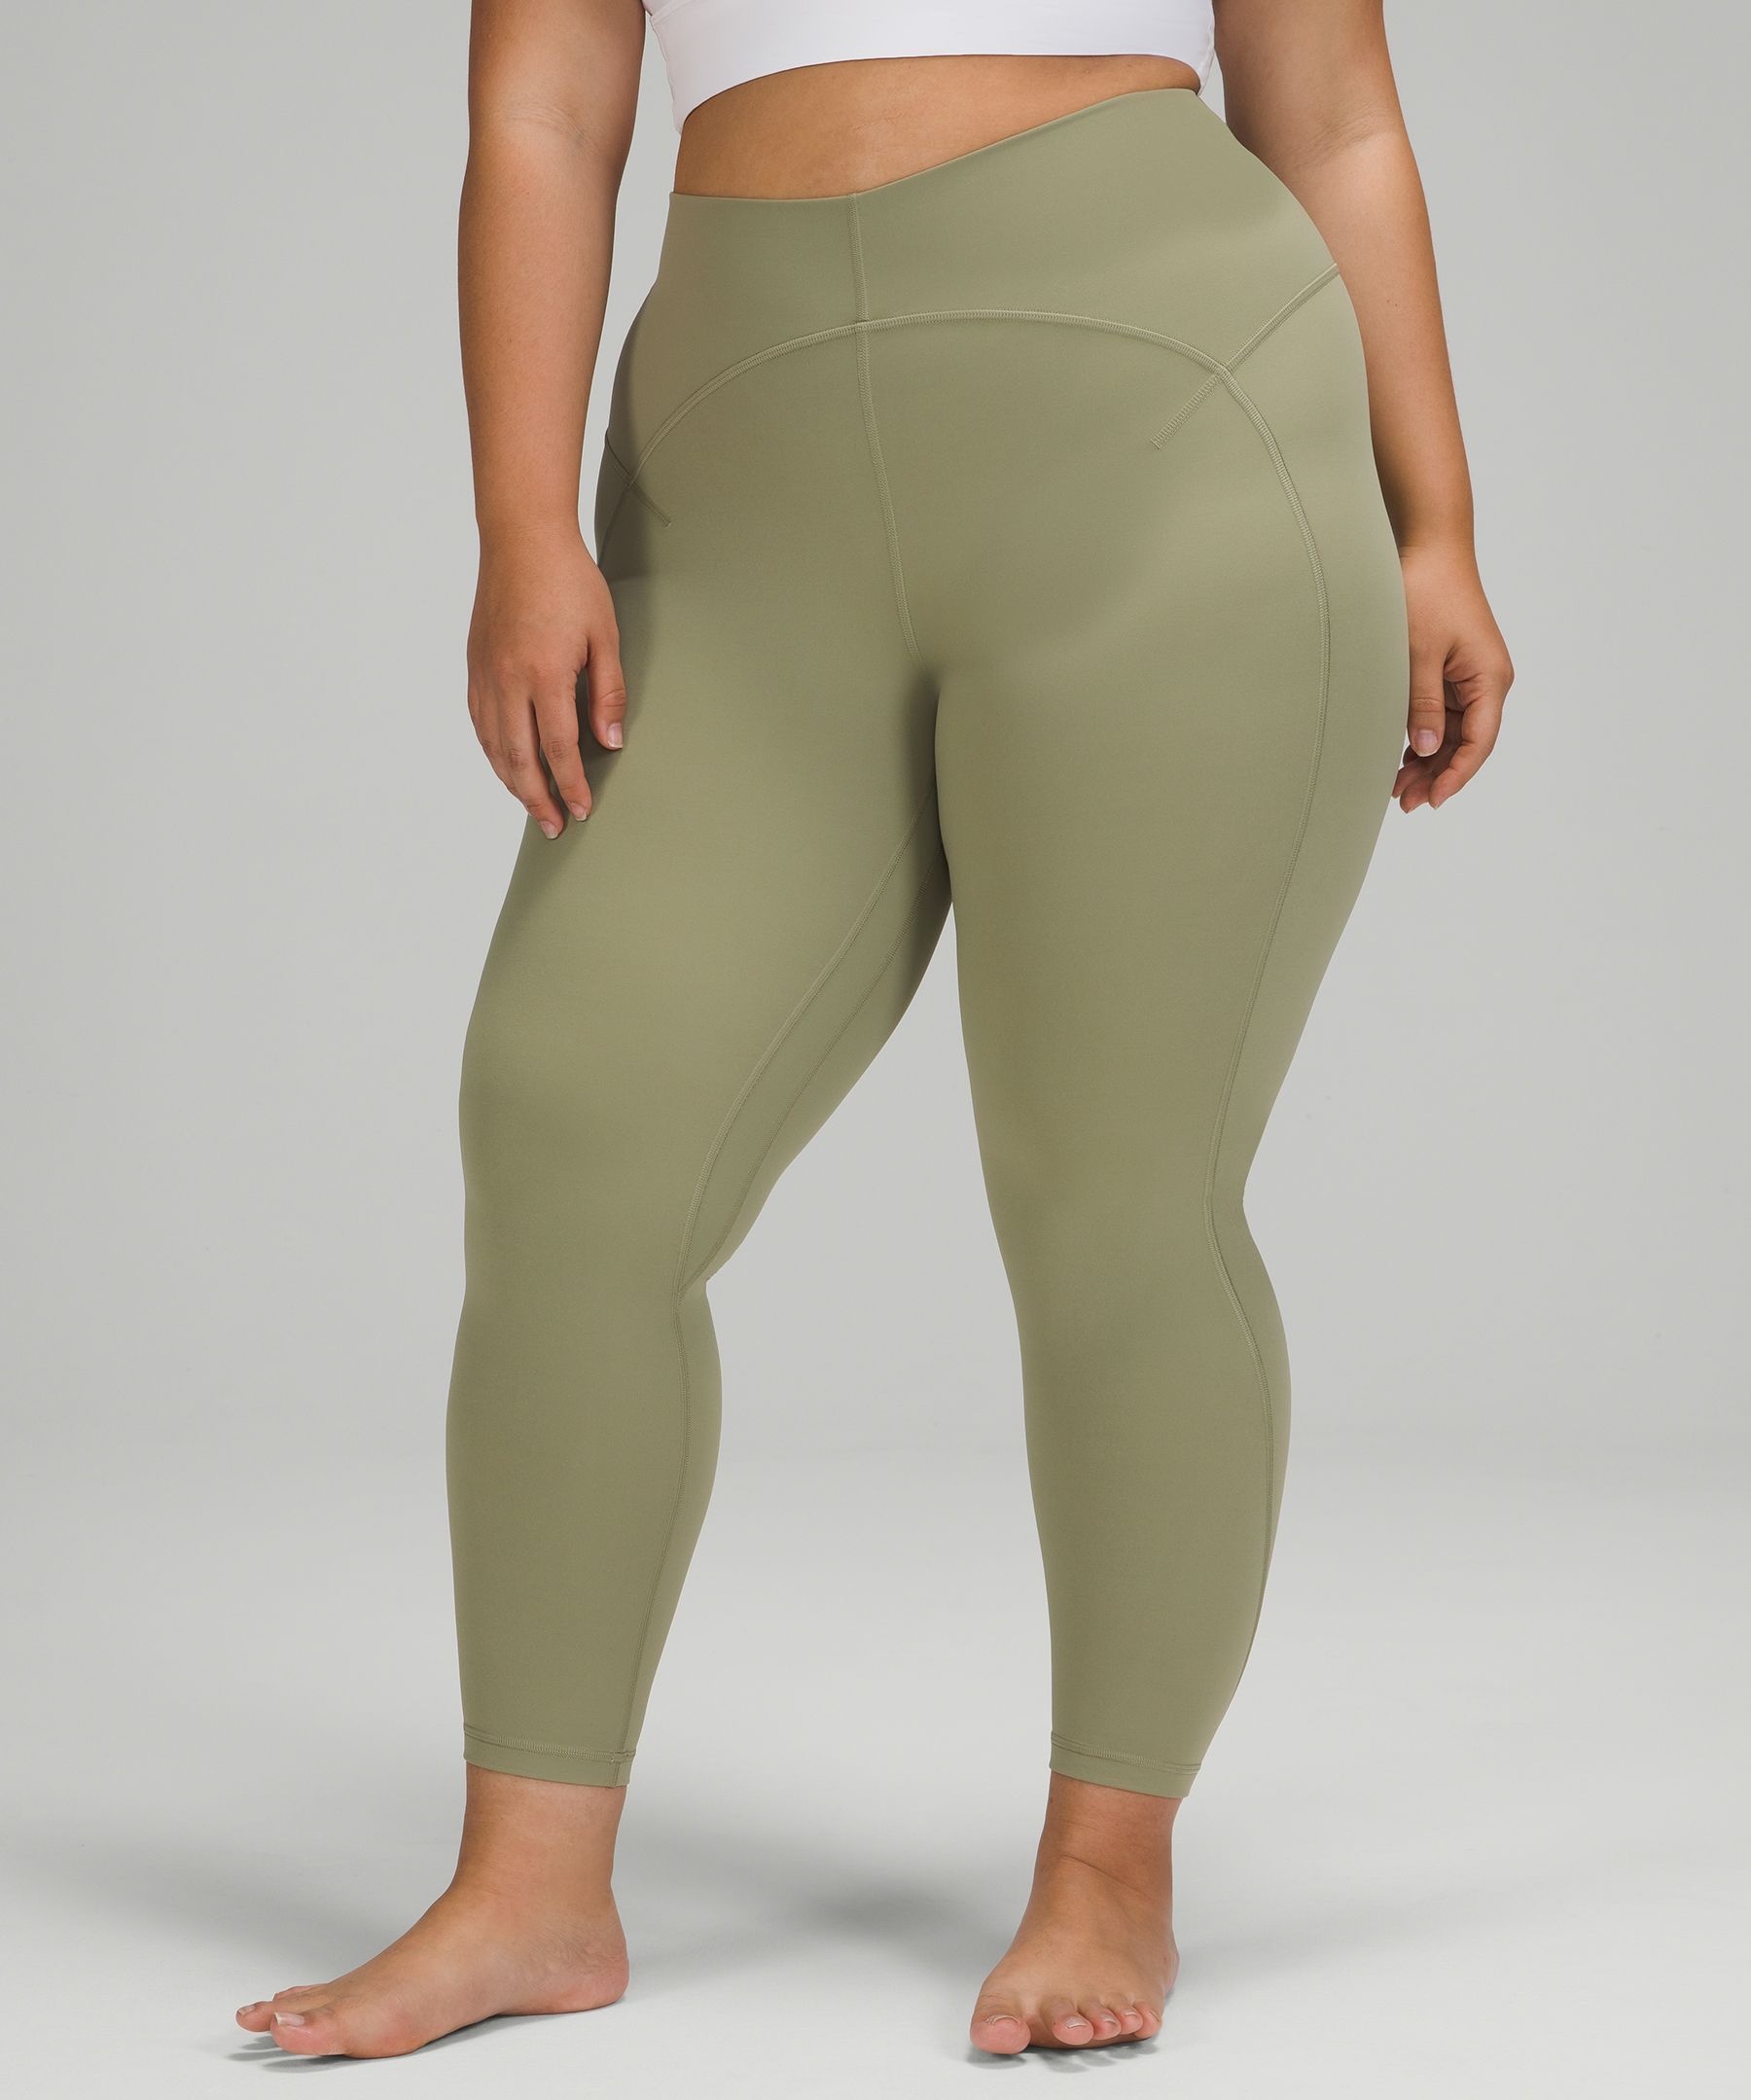 Lululemon Unlimit High-rise Tights 25 In Rosemary Green